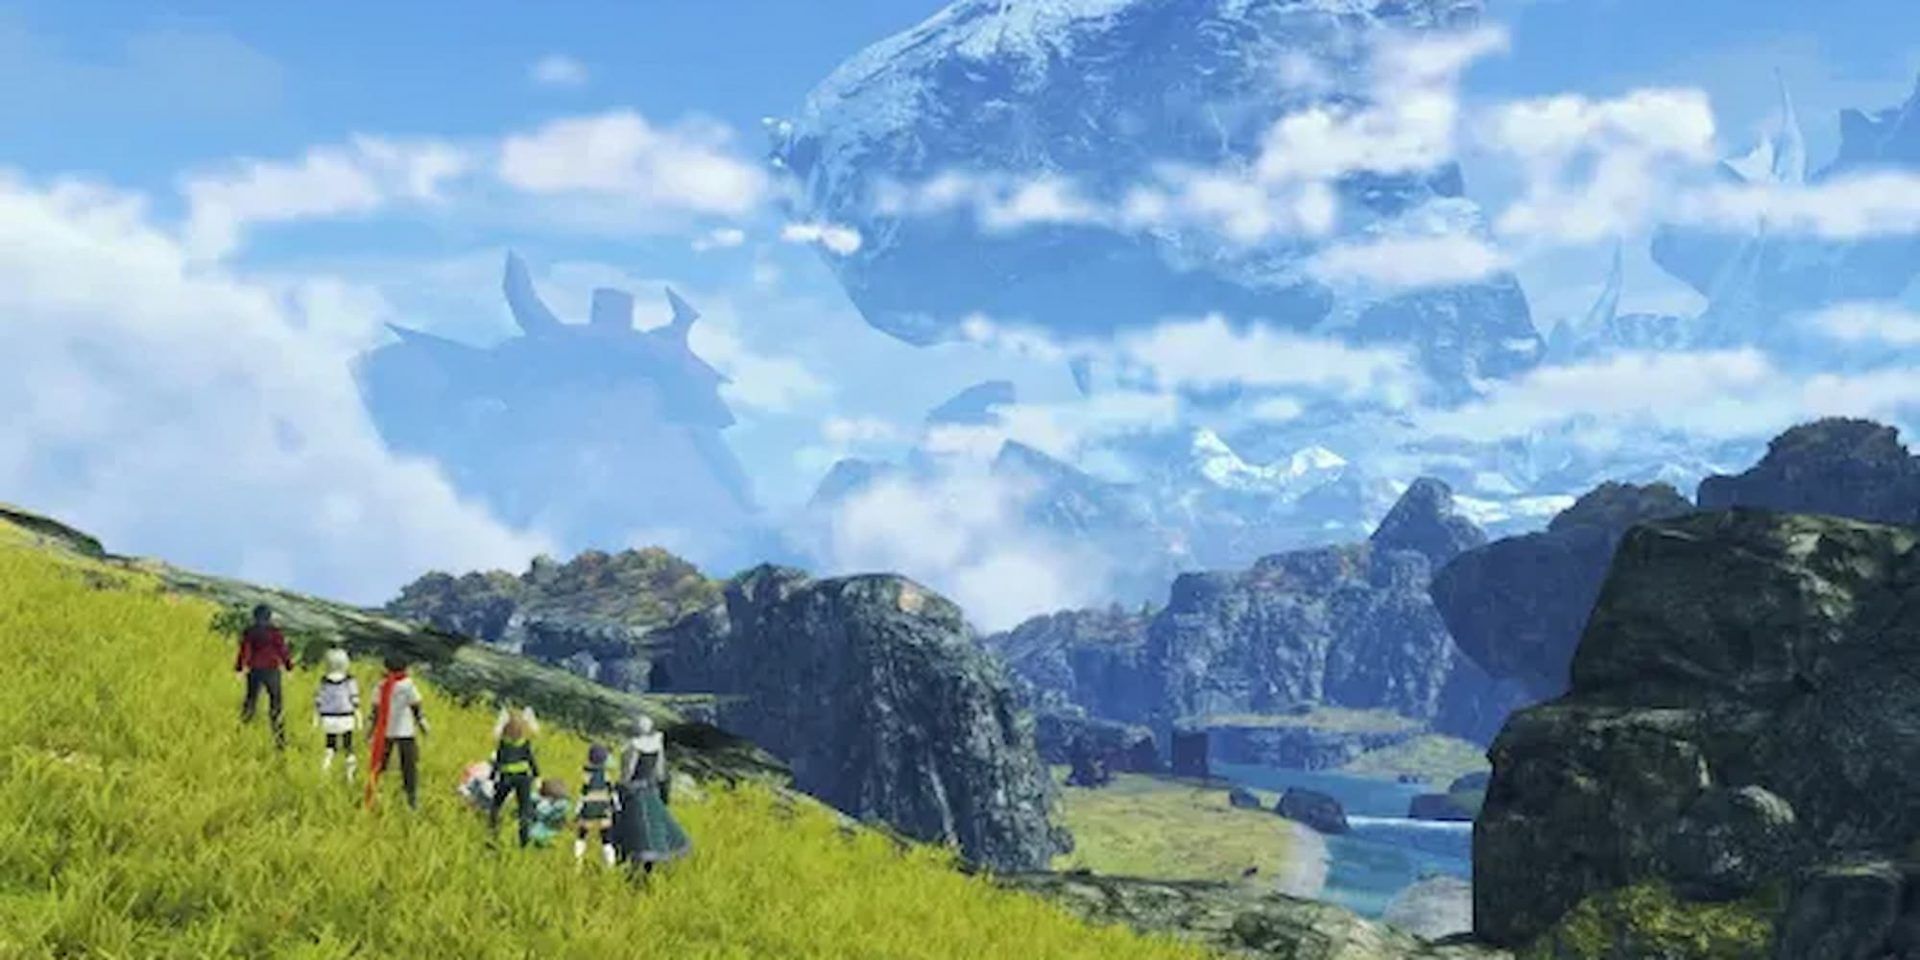 Xenoblade Chronicles 3 world of Aionios, with Noah and crew standing on a hillside.